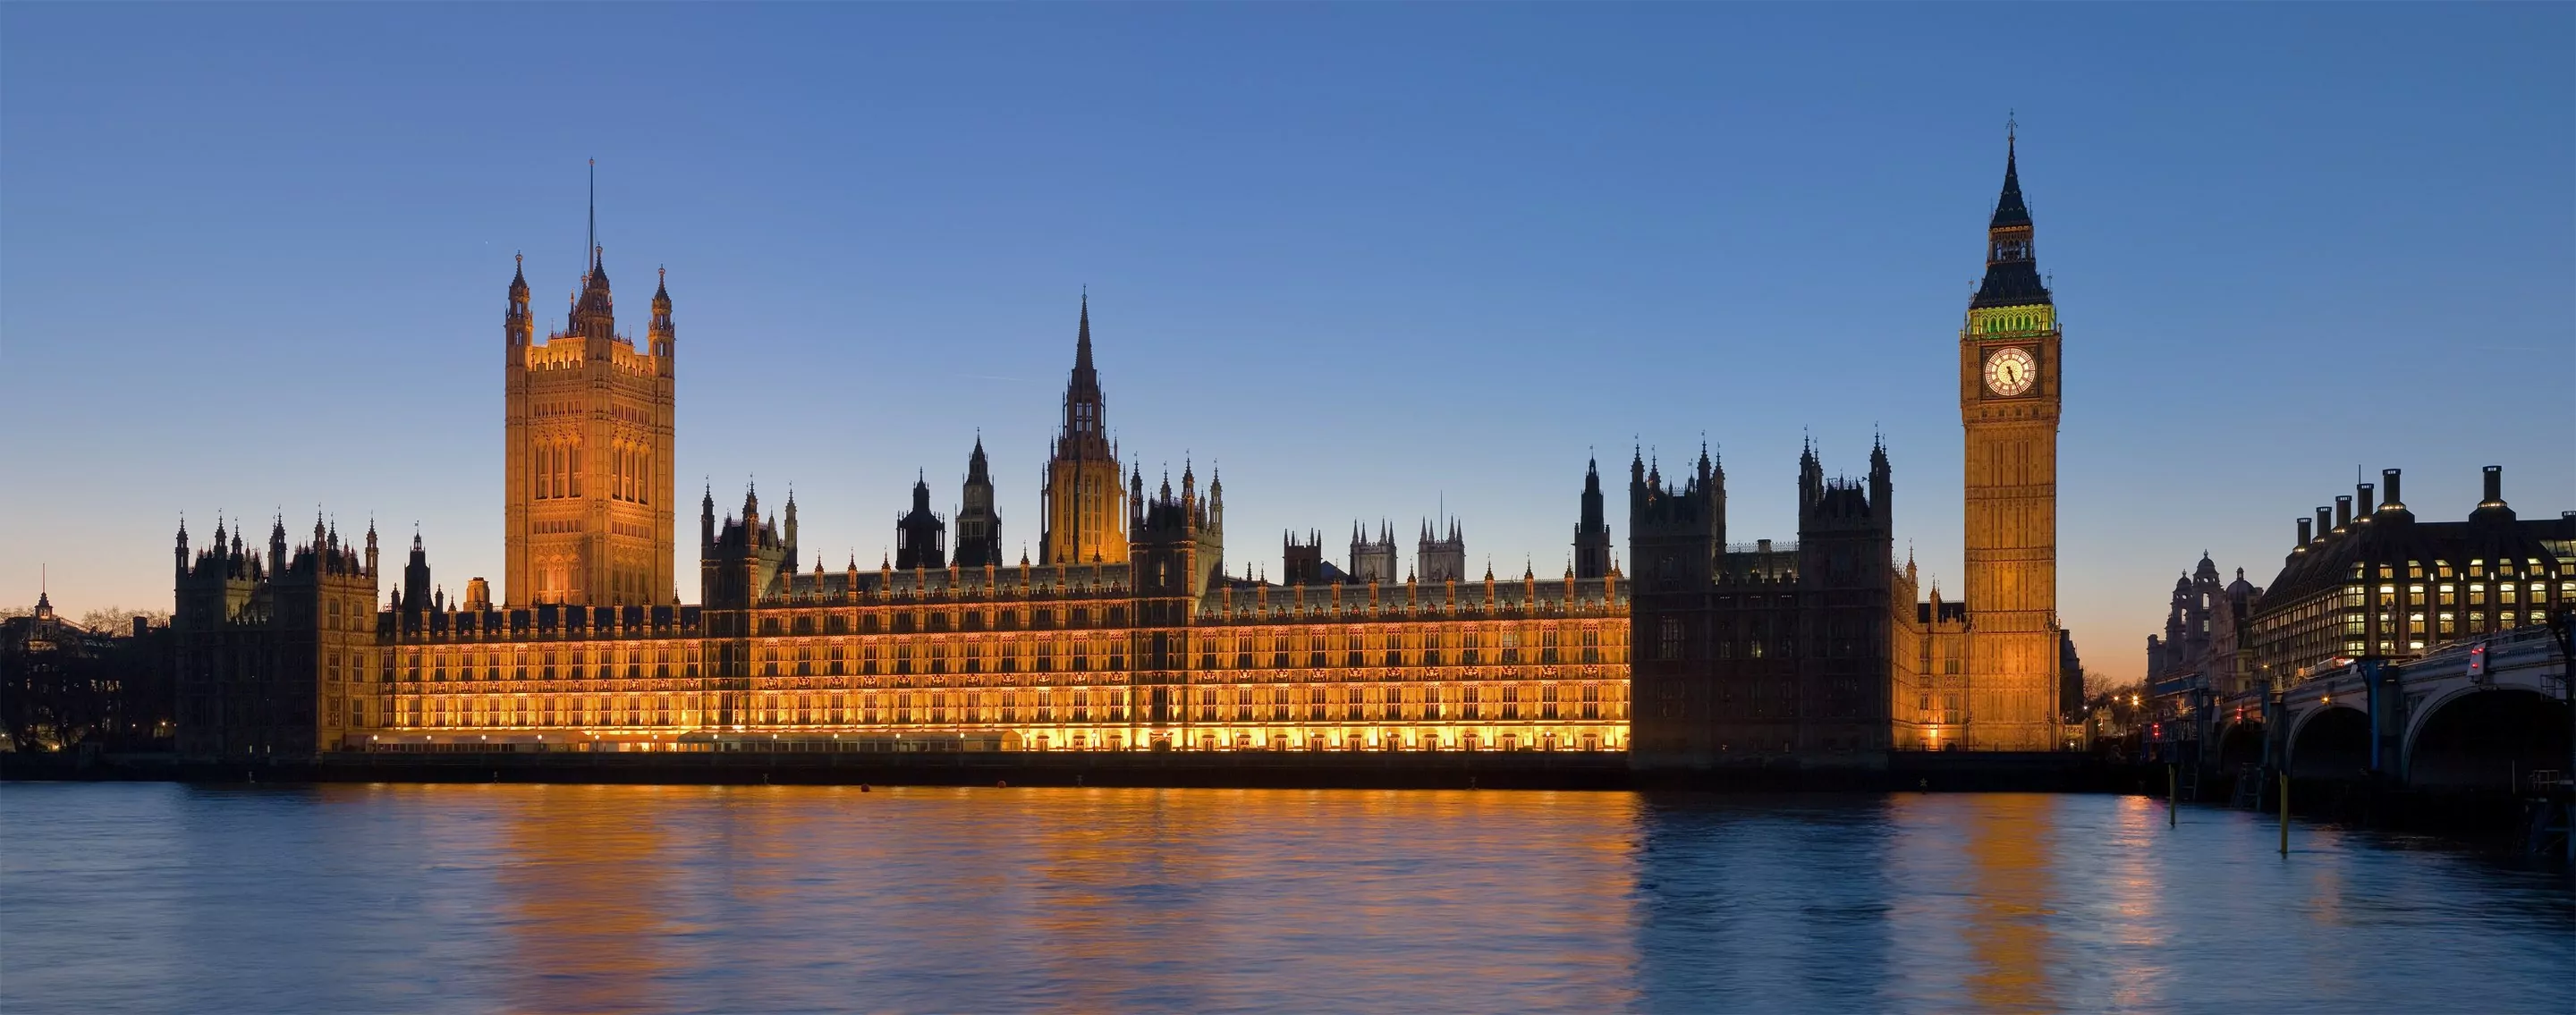 Palace of Westminster, Neoclassicism